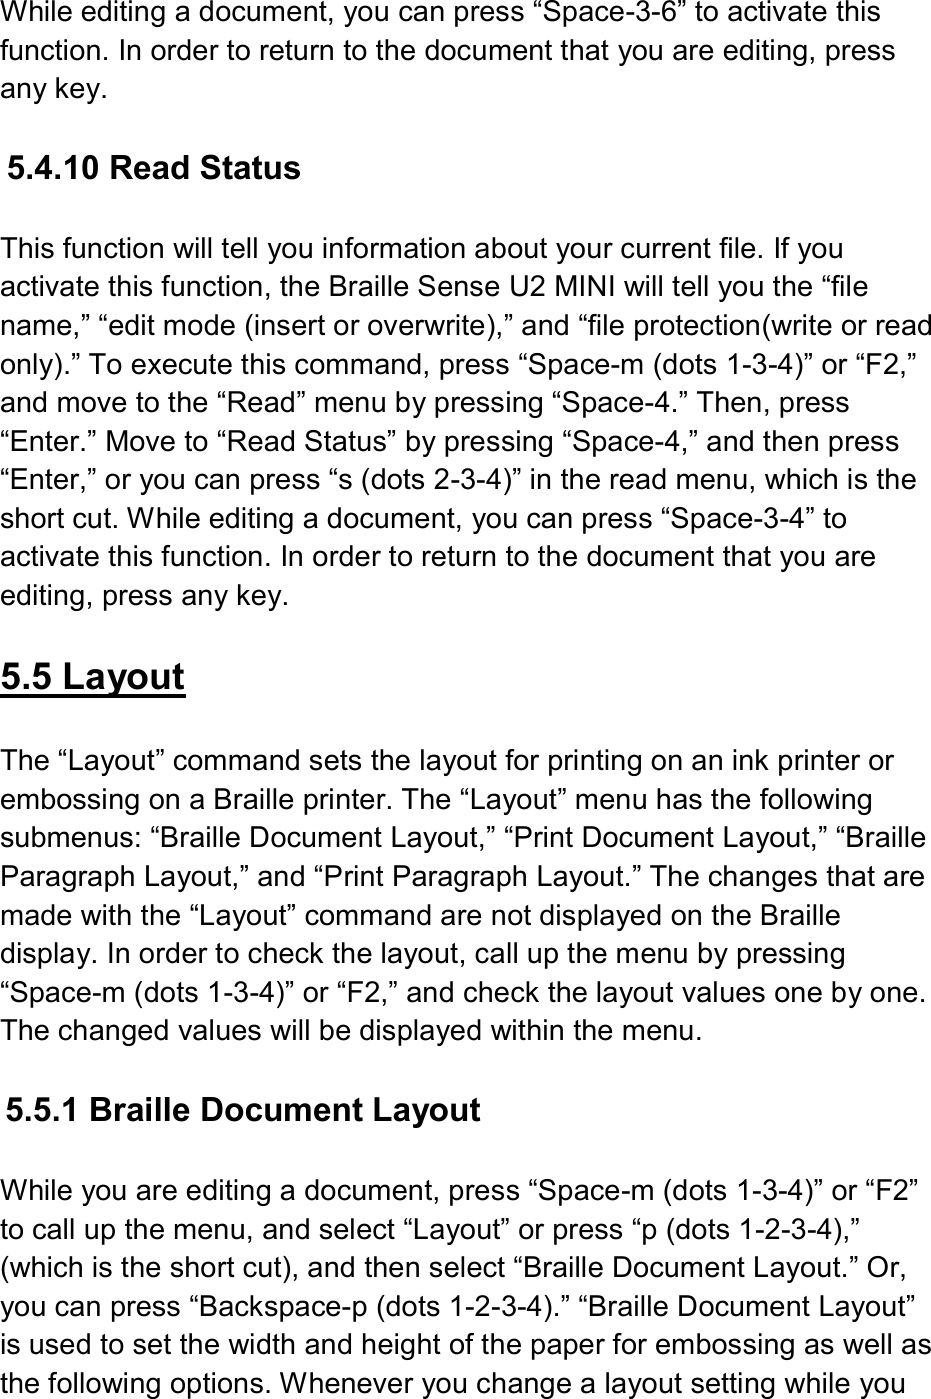  While editing a document, you can press “Space-3-6” to activate this function. In order to return to the document that you are editing, press any key.    5.4.10 Read Status  This function will tell you information about your current file. If you activate this function, the Braille Sense U2 MINI will tell you the “file name,” “edit mode (insert or overwrite),” and “file protection(write or read only).” To execute this command, press “Space-m (dots 1-3-4)” or “F2,” and move to the “Read” menu by pressing “Space-4.” Then, press “Enter.” Move to “Read Status” by pressing “Space-4,” and then press “Enter,” or you can press “s (dots 2-3-4)” in the read menu, which is the short cut. While editing a document, you can press “Space-3-4” to activate this function. In order to return to the document that you are editing, press any key.  5.5 Layout  The “Layout” command sets the layout for printing on an ink printer or embossing on a Braille printer. The “Layout” menu has the following submenus: “Braille Document Layout,” “Print Document Layout,” “Braille Paragraph Layout,” and “Print Paragraph Layout.” The changes that are made with the “Layout” command are not displayed on the Braille display. In order to check the layout, call up the menu by pressing “Space-m (dots 1-3-4)” or “F2,” and check the layout values one by one. The changed values will be displayed within the menu.  5.5.1 Braille Document Layout    While you are editing a document, press “Space-m (dots 1-3-4)” or “F2” to call up the menu, and select “Layout” or press “p (dots 1-2-3-4),” (which is the short cut), and then select “Braille Document Layout.” Or, you can press “Backspace-p (dots 1-2-3-4).” “Braille Document Layout” is used to set the width and height of the paper for embossing as well as the following options. Whenever you change a layout setting while you 